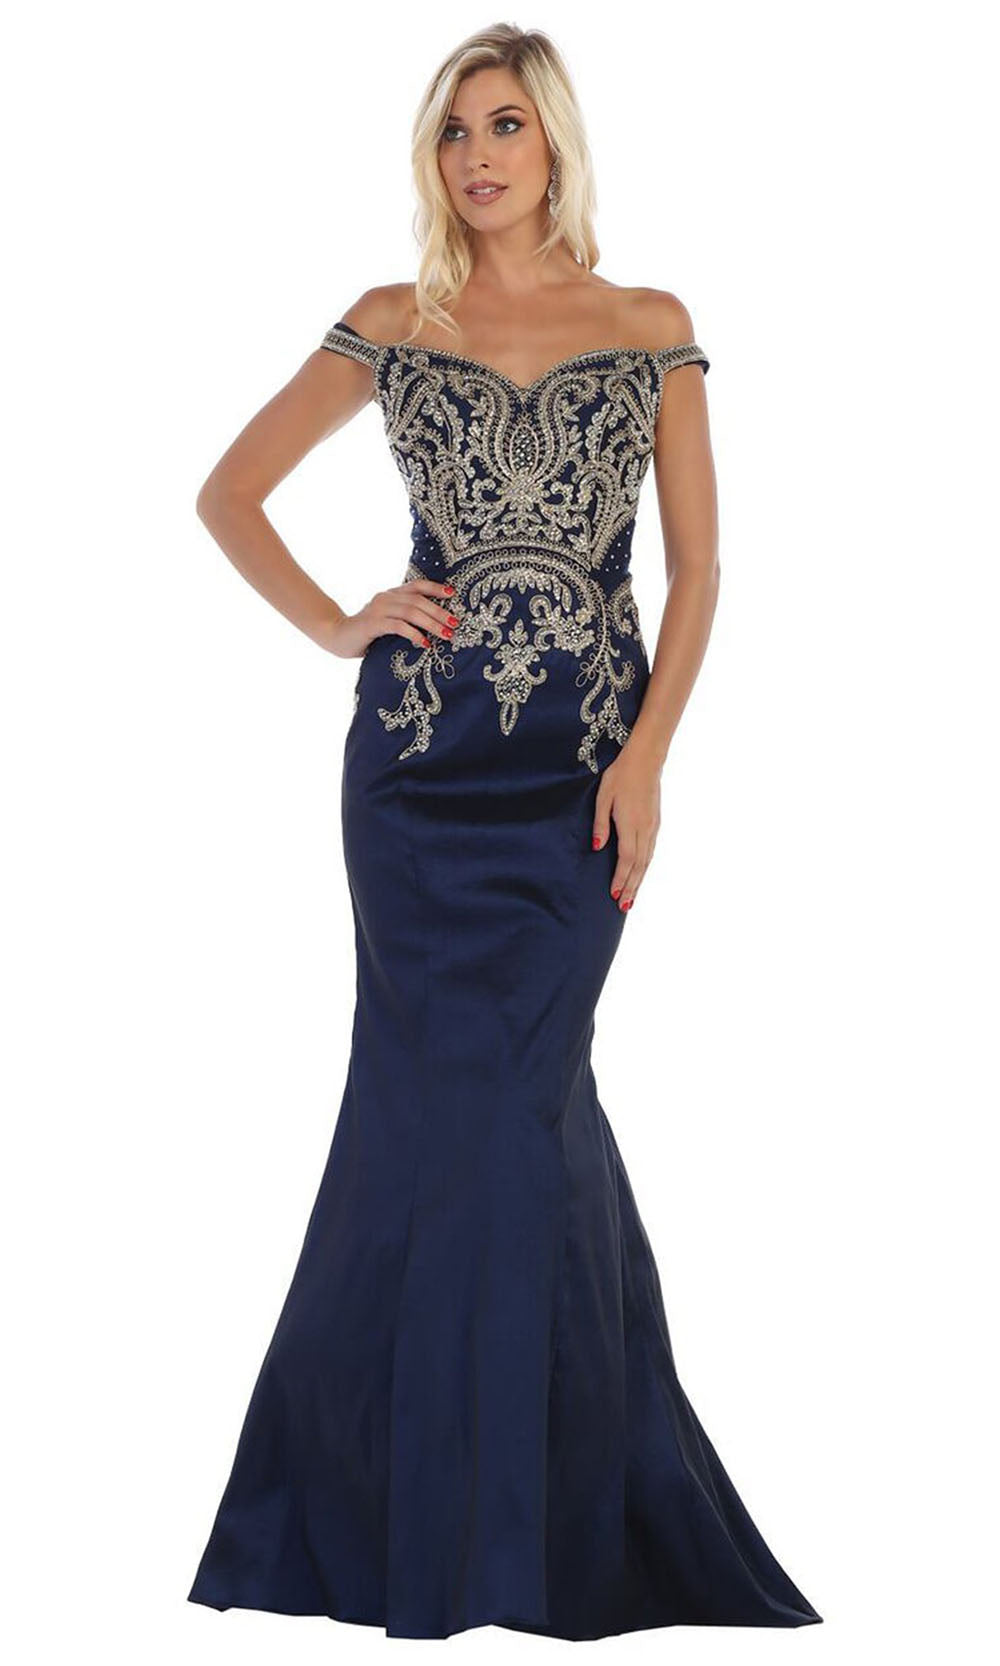 May Queen - MQ1609 Off Shoulder Trumpet Gown In Blue and Black